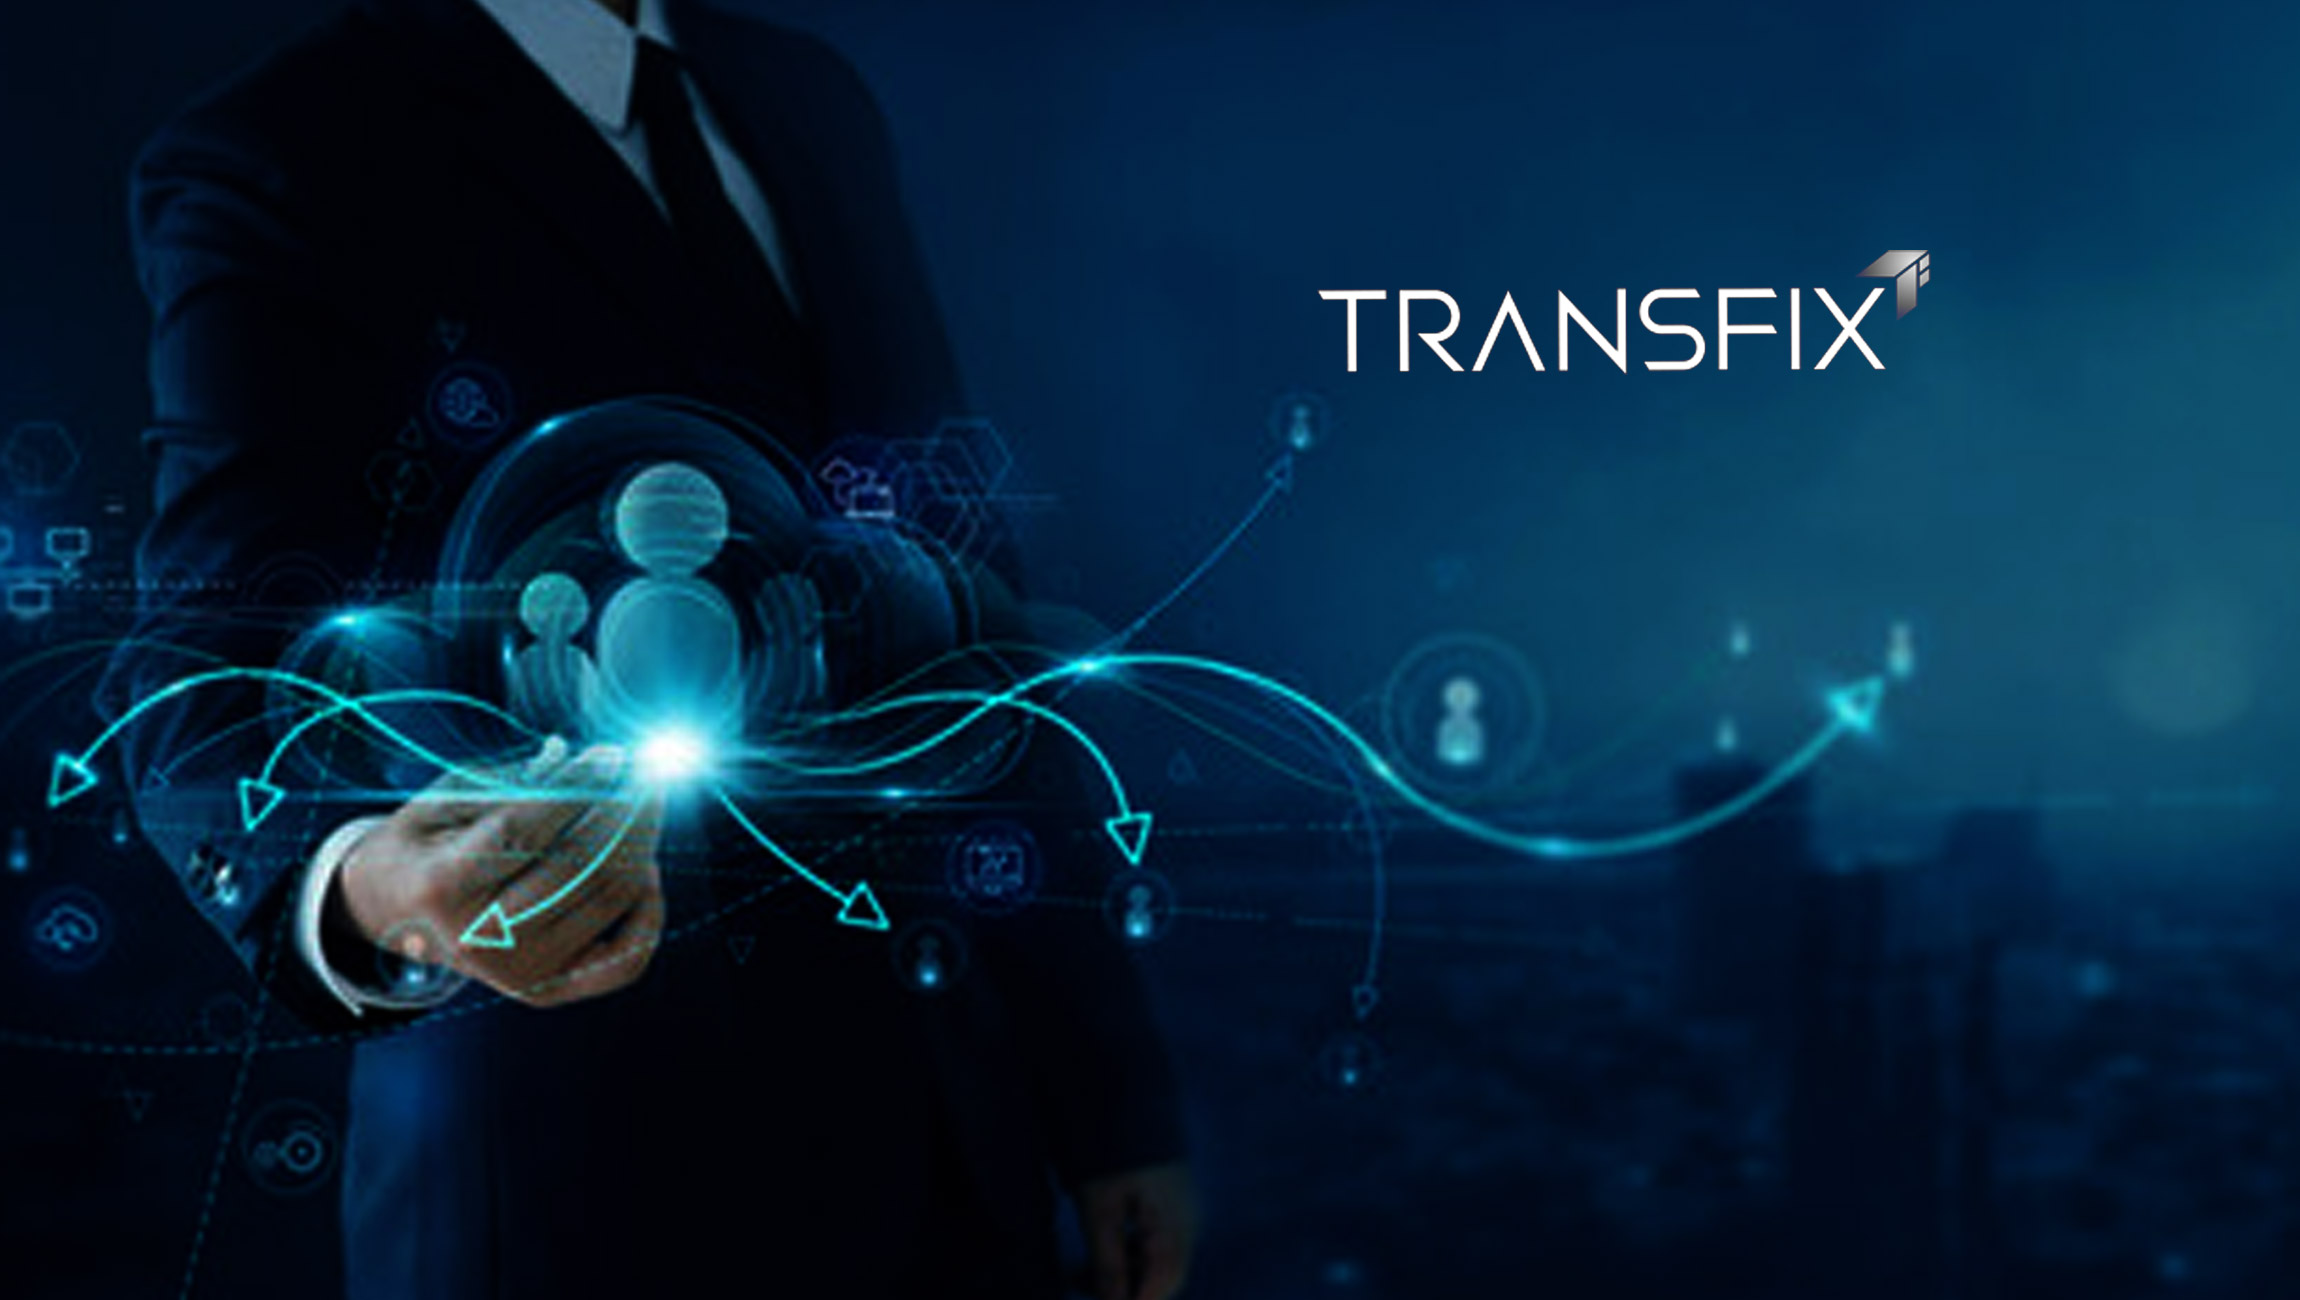 Transfix Appoints First-Ever Chief Product Officer Tony Tzeng to Continue Digital Transformation of the Supply Chain